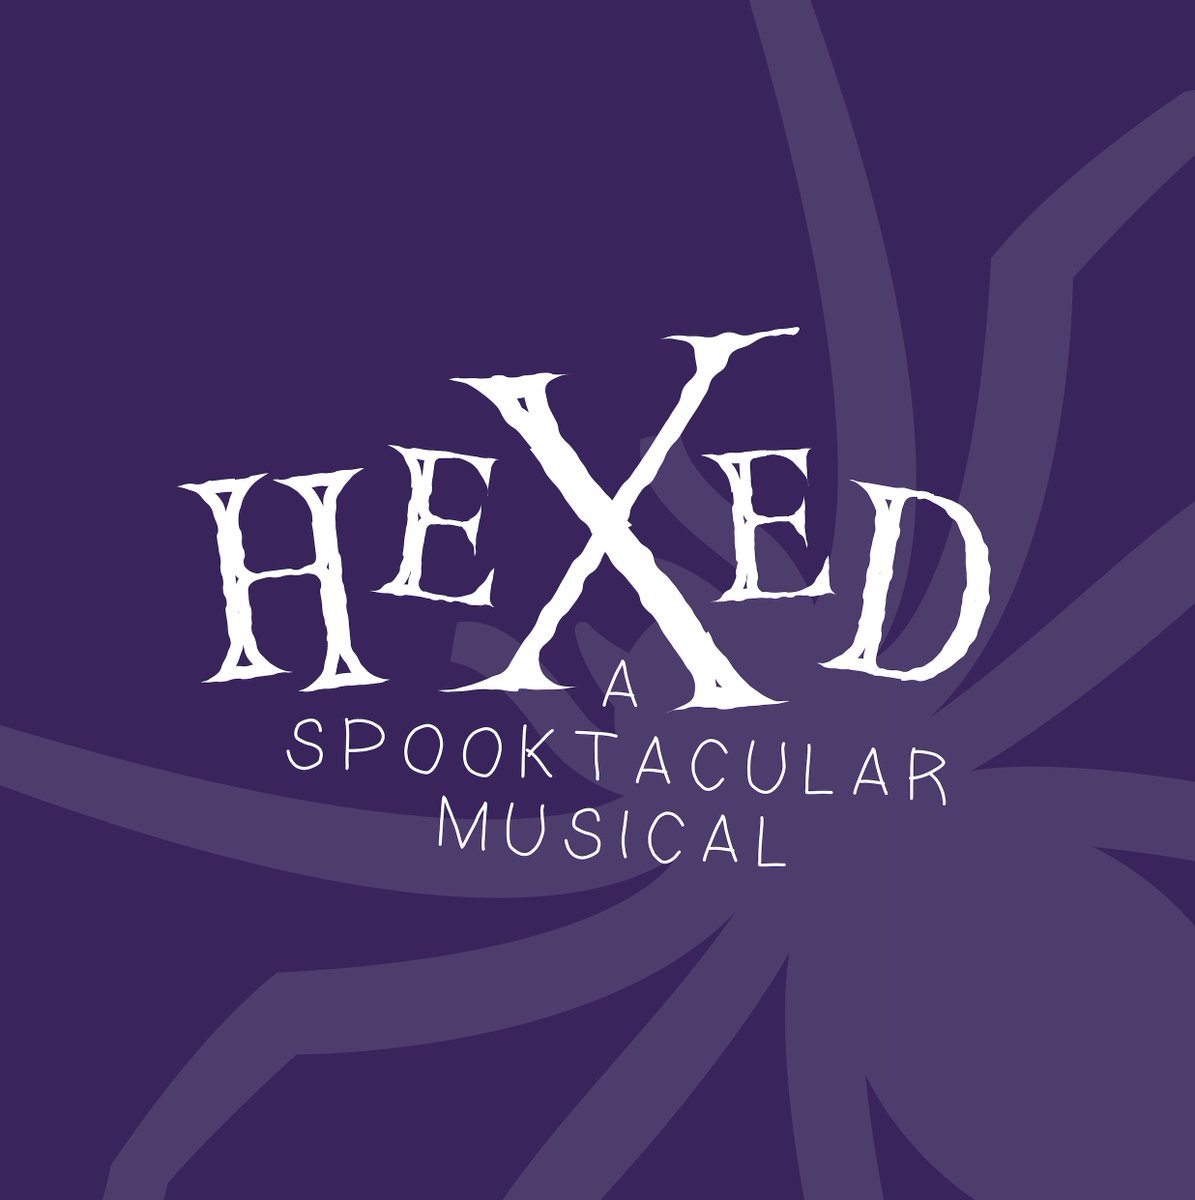 Today is also a very exciting day because we are releasing our latest pack. Hexed - A Spooktacular Musical. This themed pack made especially for Halloween gives an at home alternative to Trick Or Treating with all of the dressing up but with added music.